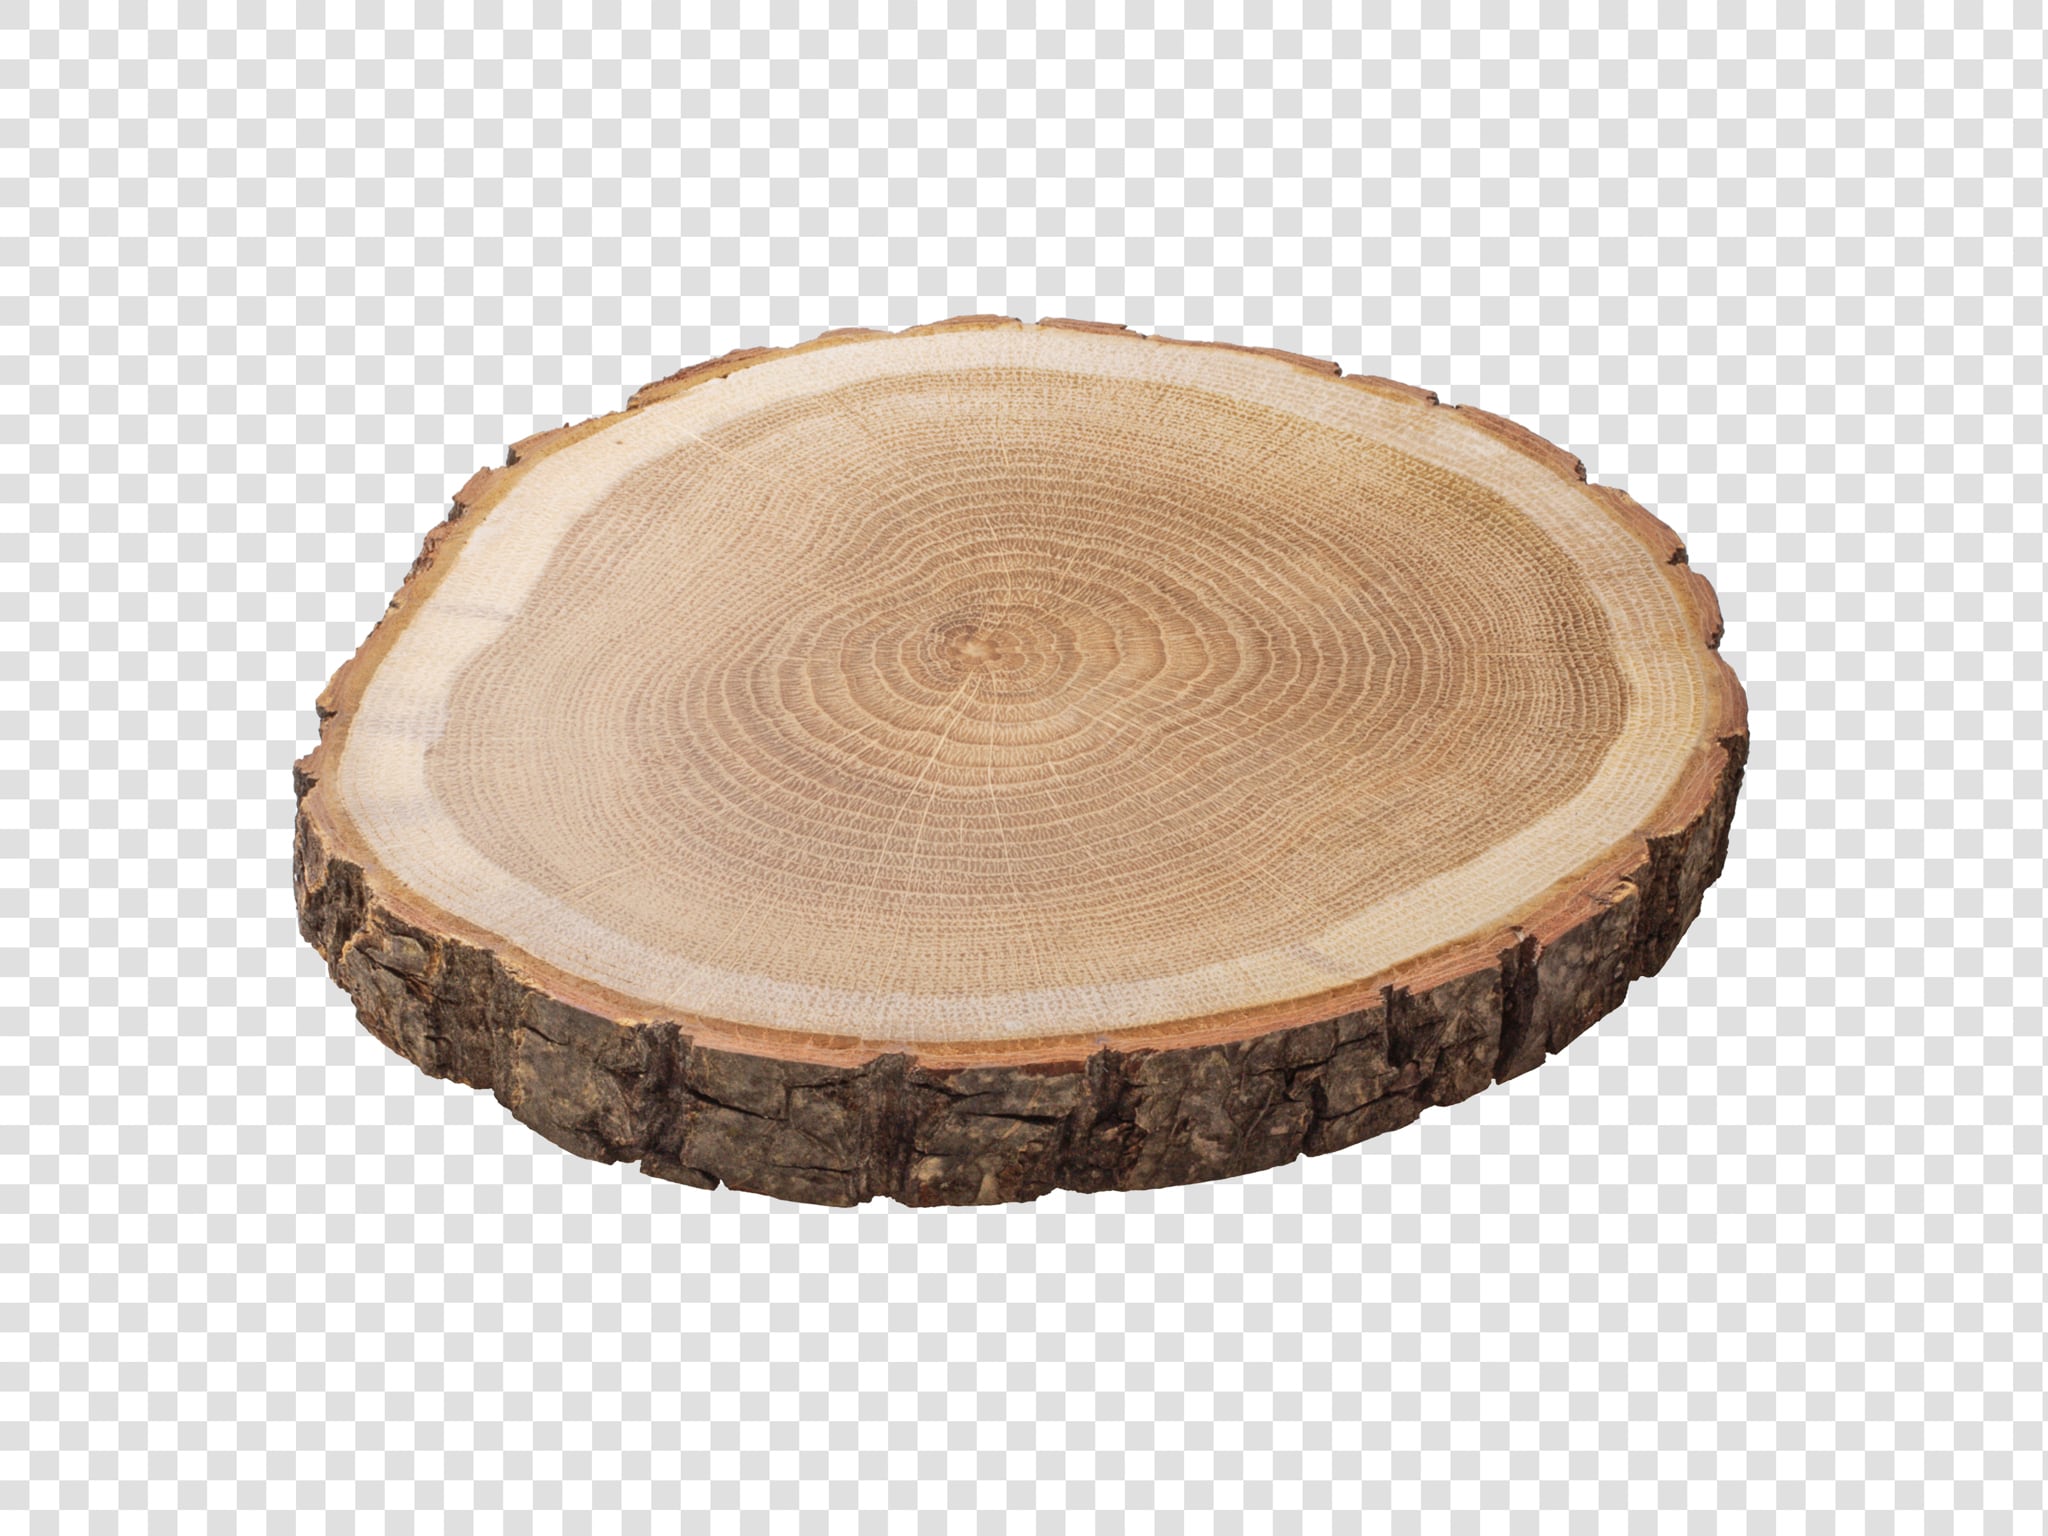 Craft image with transparent background